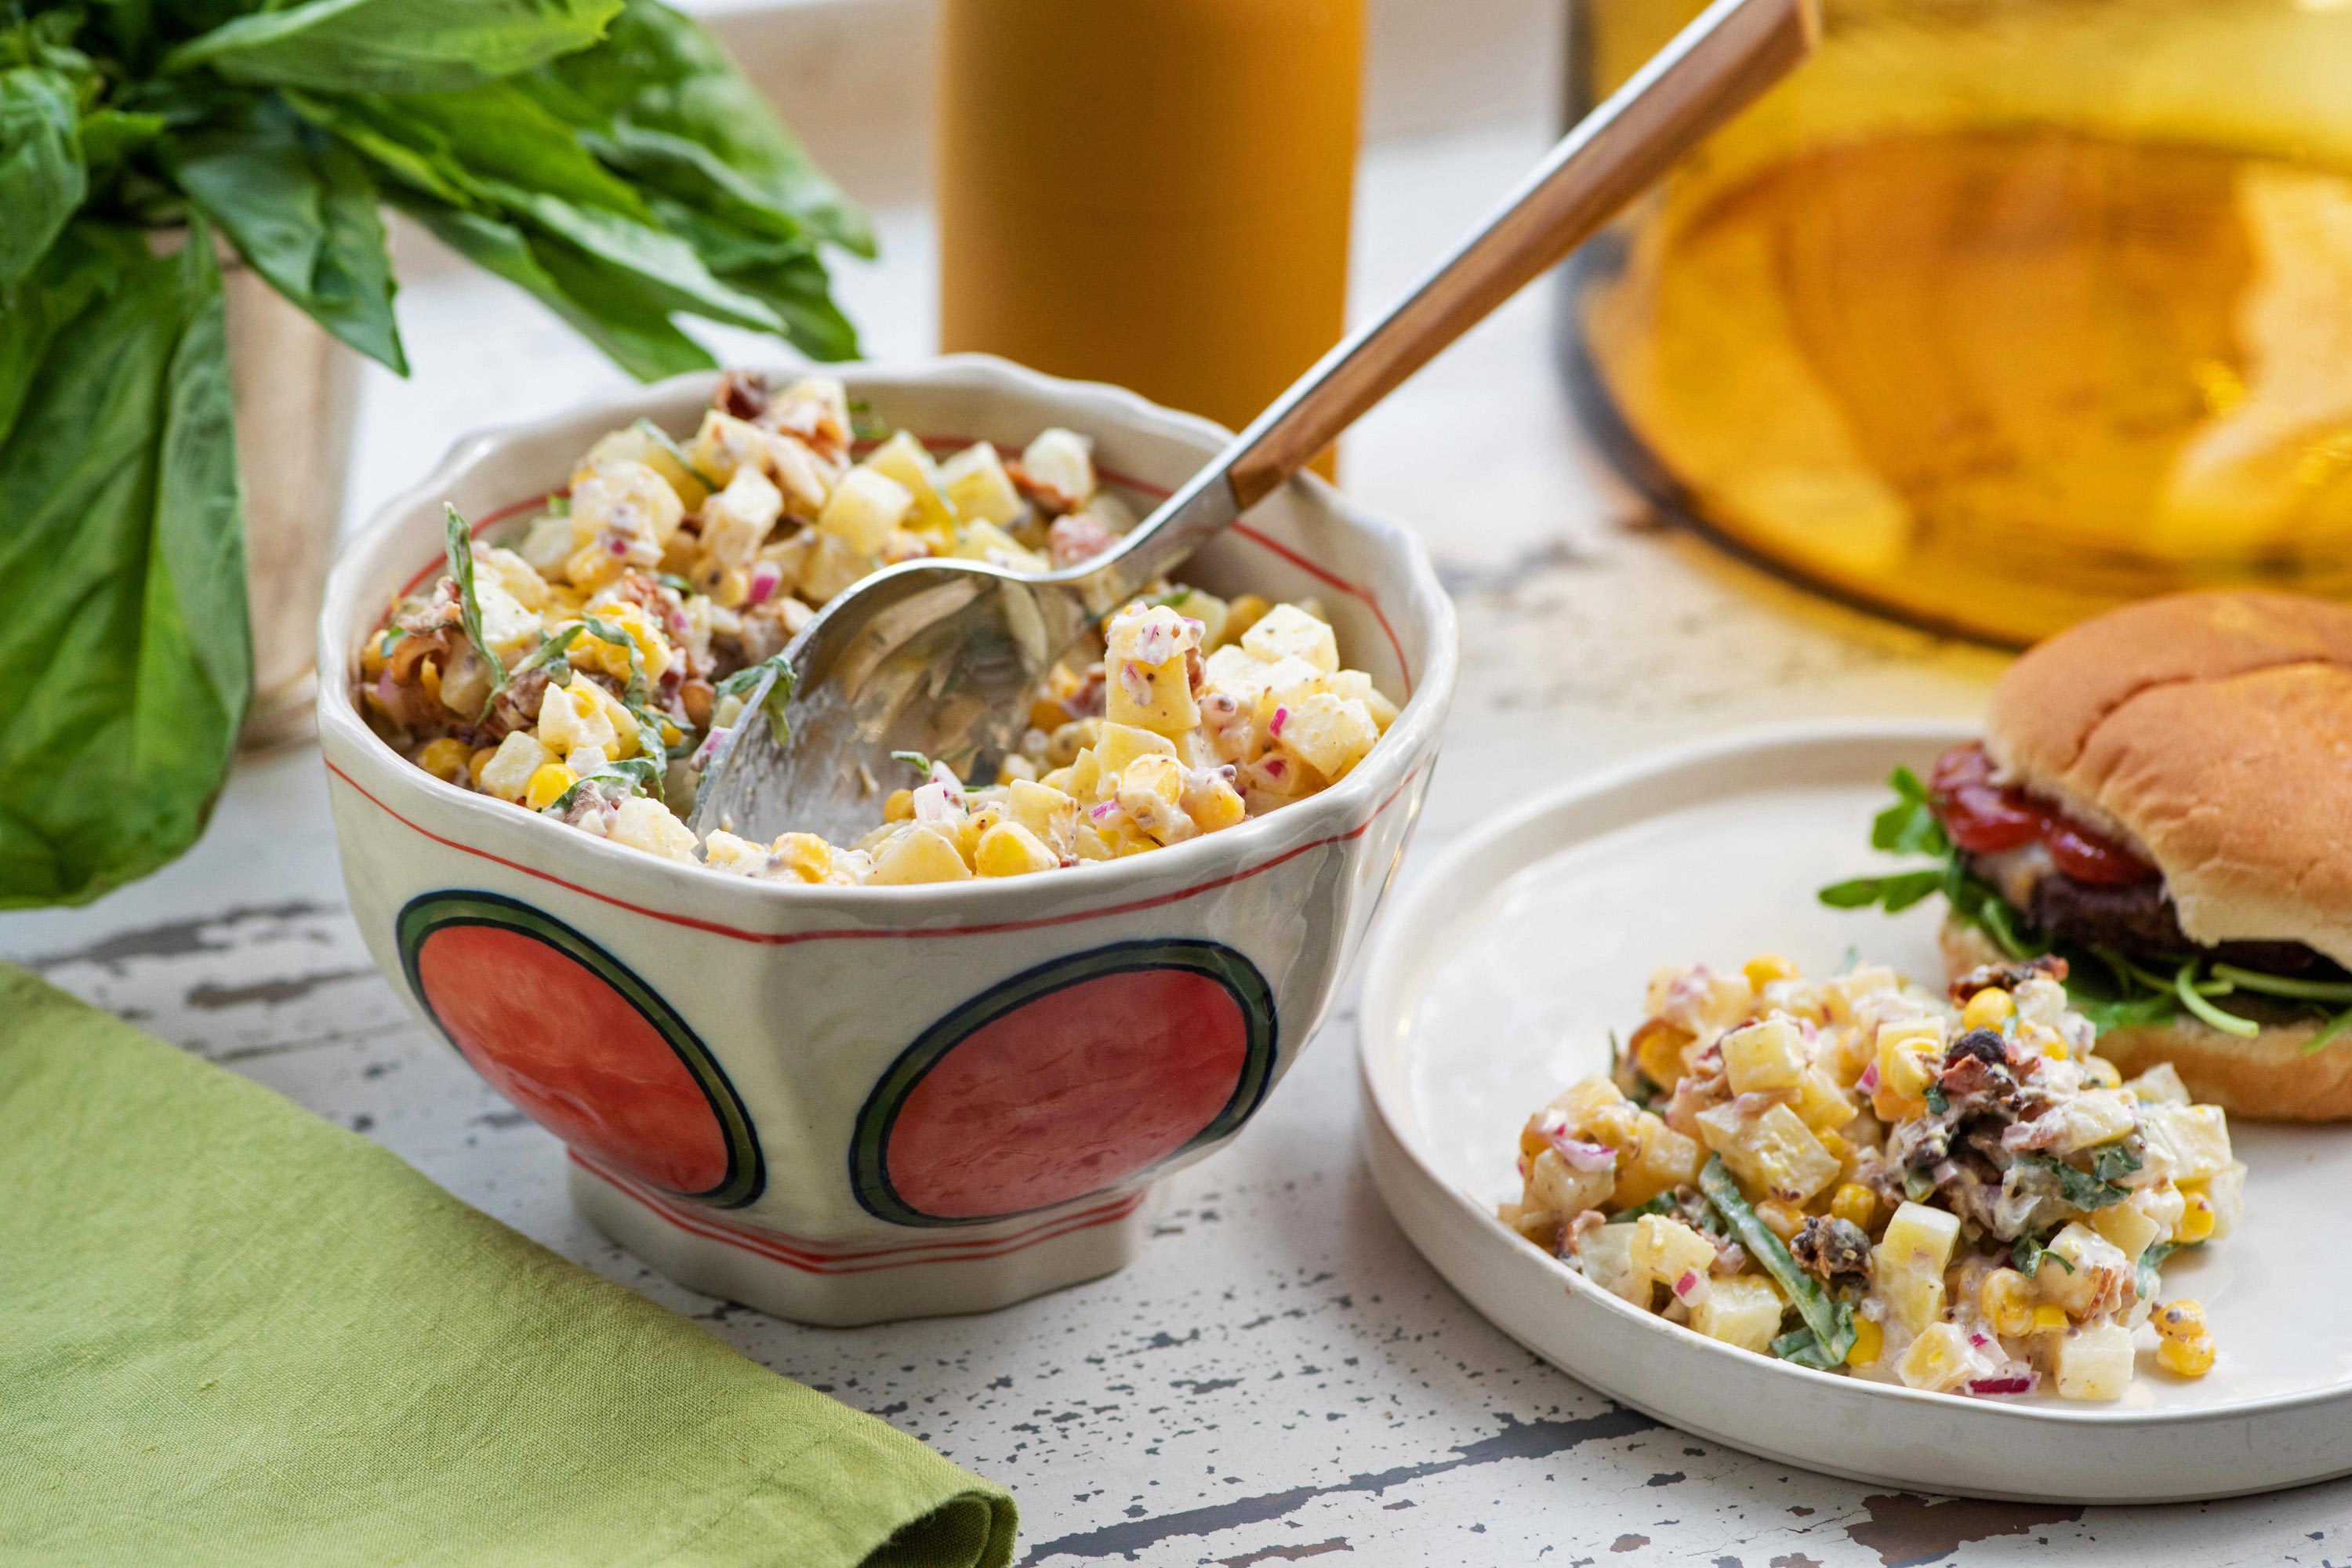 Spoon in a bowl of Creamy Corn and Potato Salad with Bacon and Lemon Buttermilk Dressing.